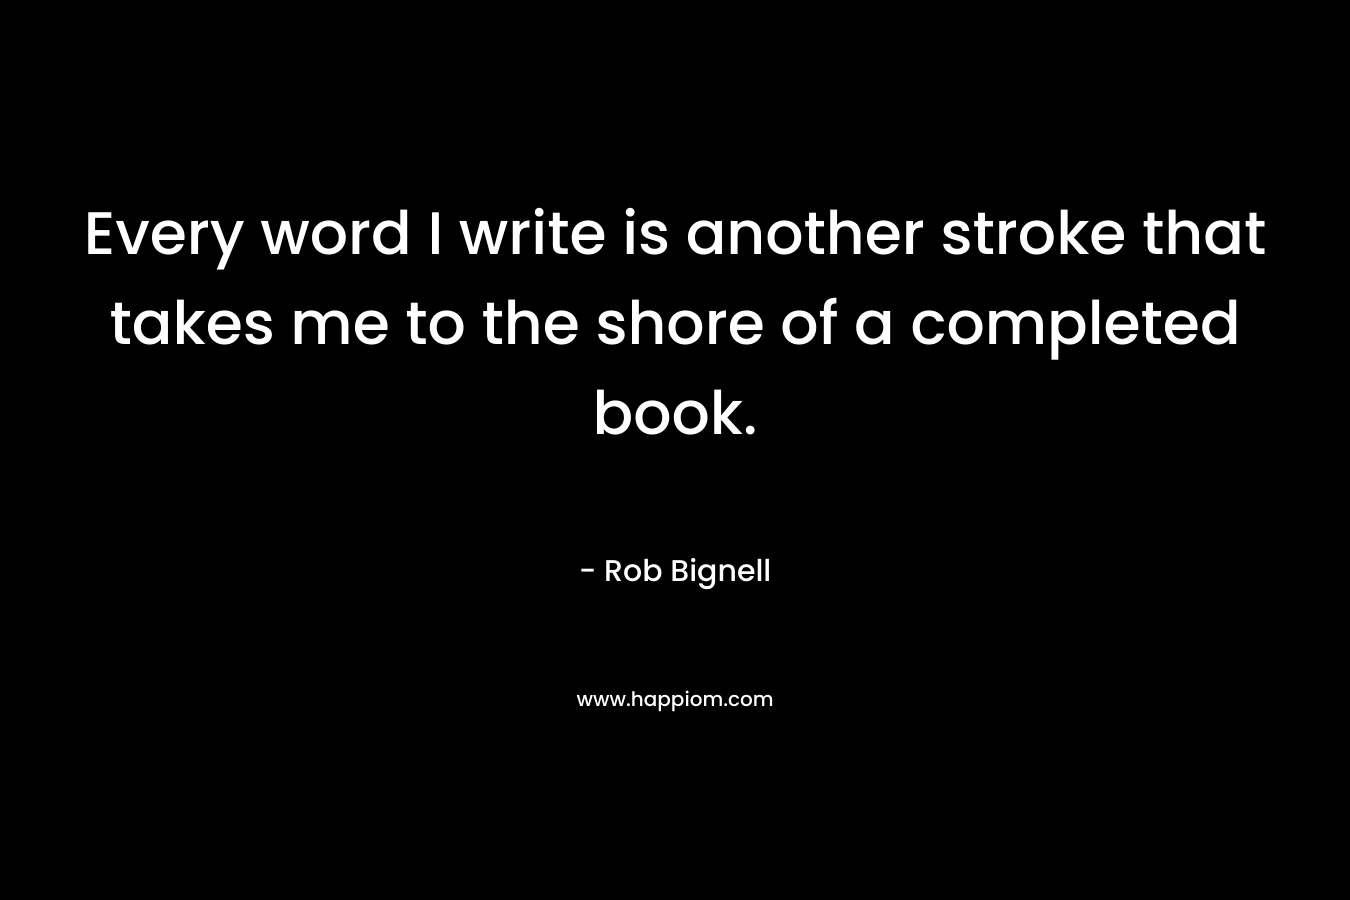 Every word I write is another stroke that takes me to the shore of a completed book. – Rob Bignell